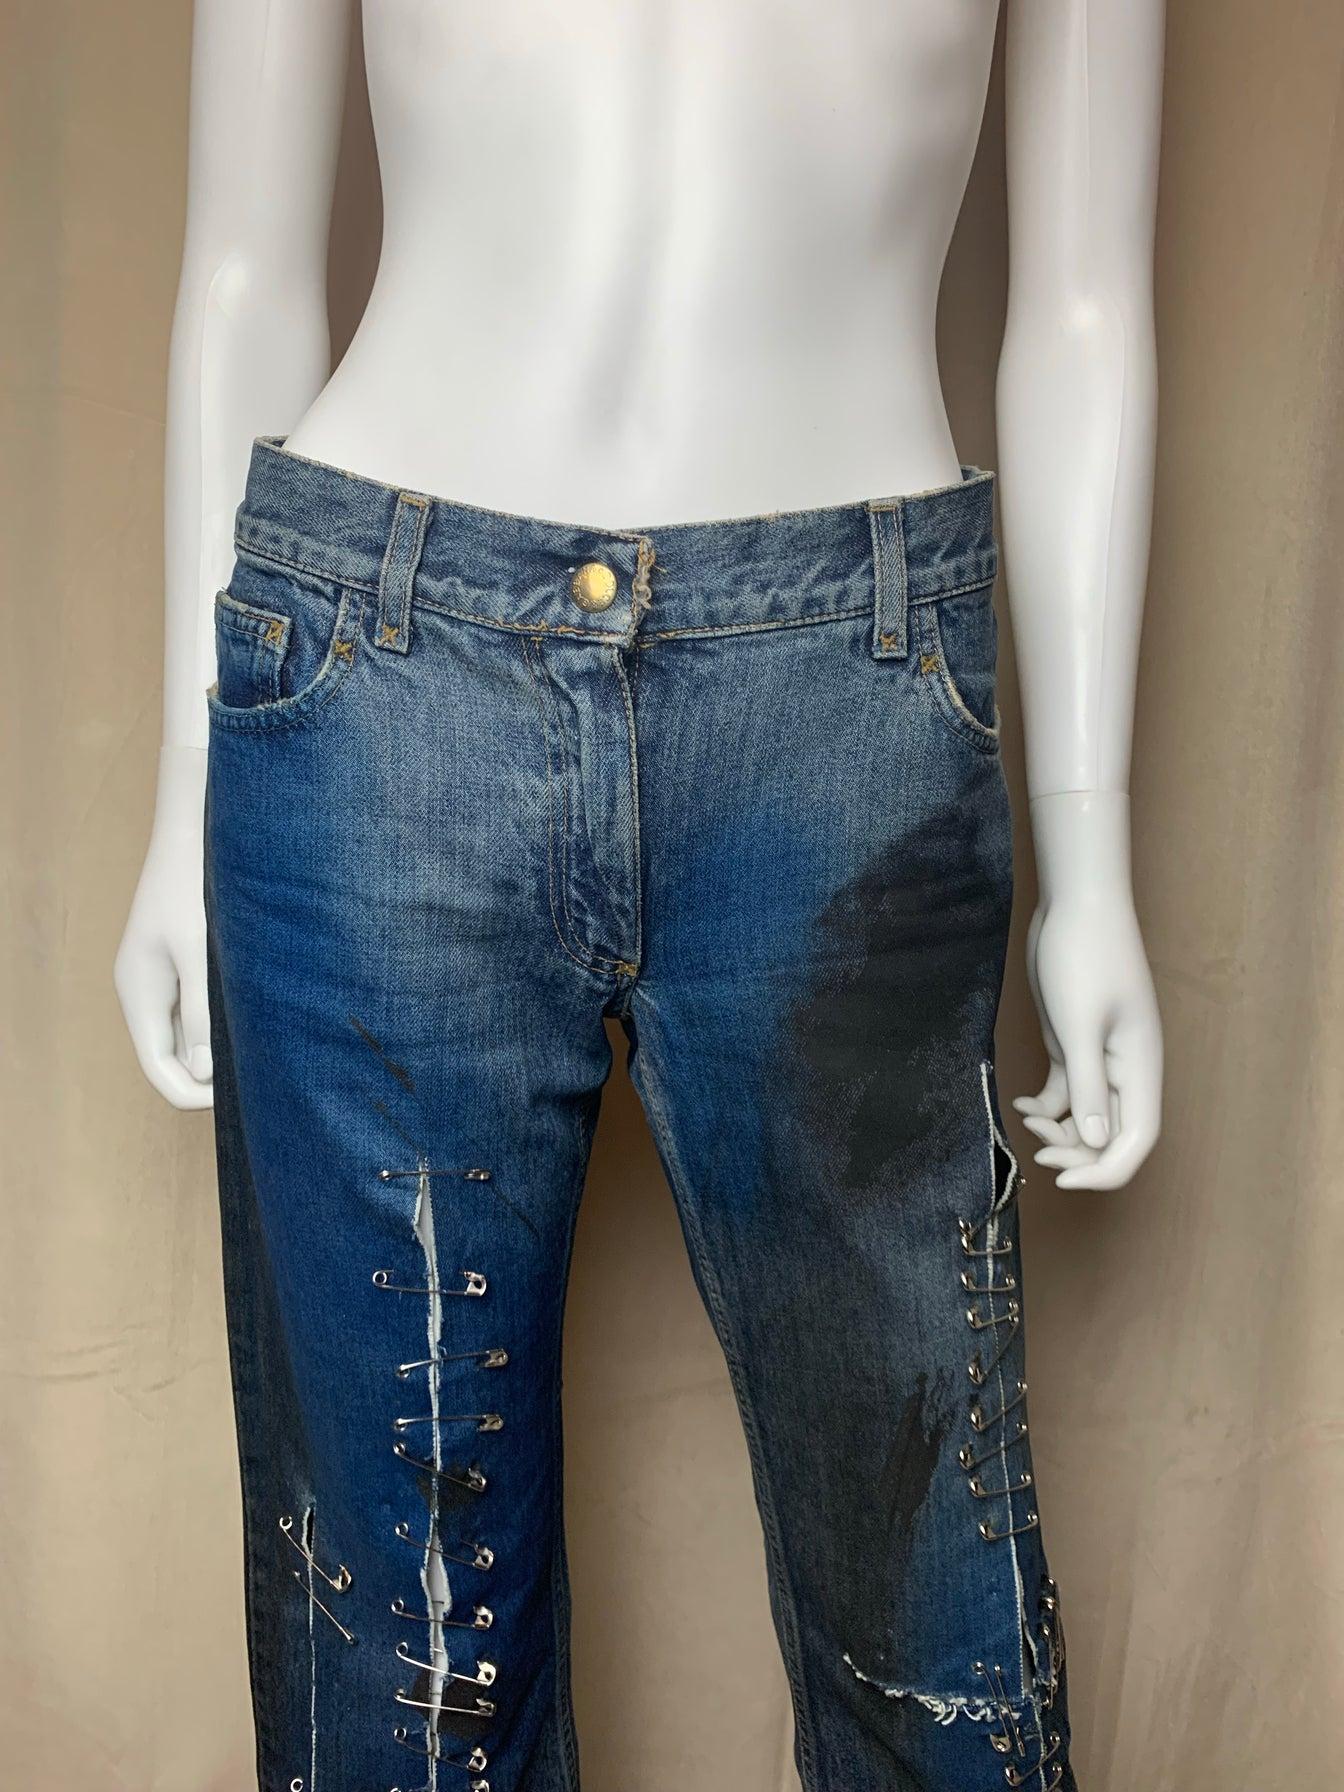 - Guaranteed 100% Authentic.

- Perfect preowned condition. The pants are destress and styled with safety pins. You can also add brooches and pins to the pants if you like. Also a big gold buckle on back of jeans. 

- Size: 2 US. waist: 14” inseam: